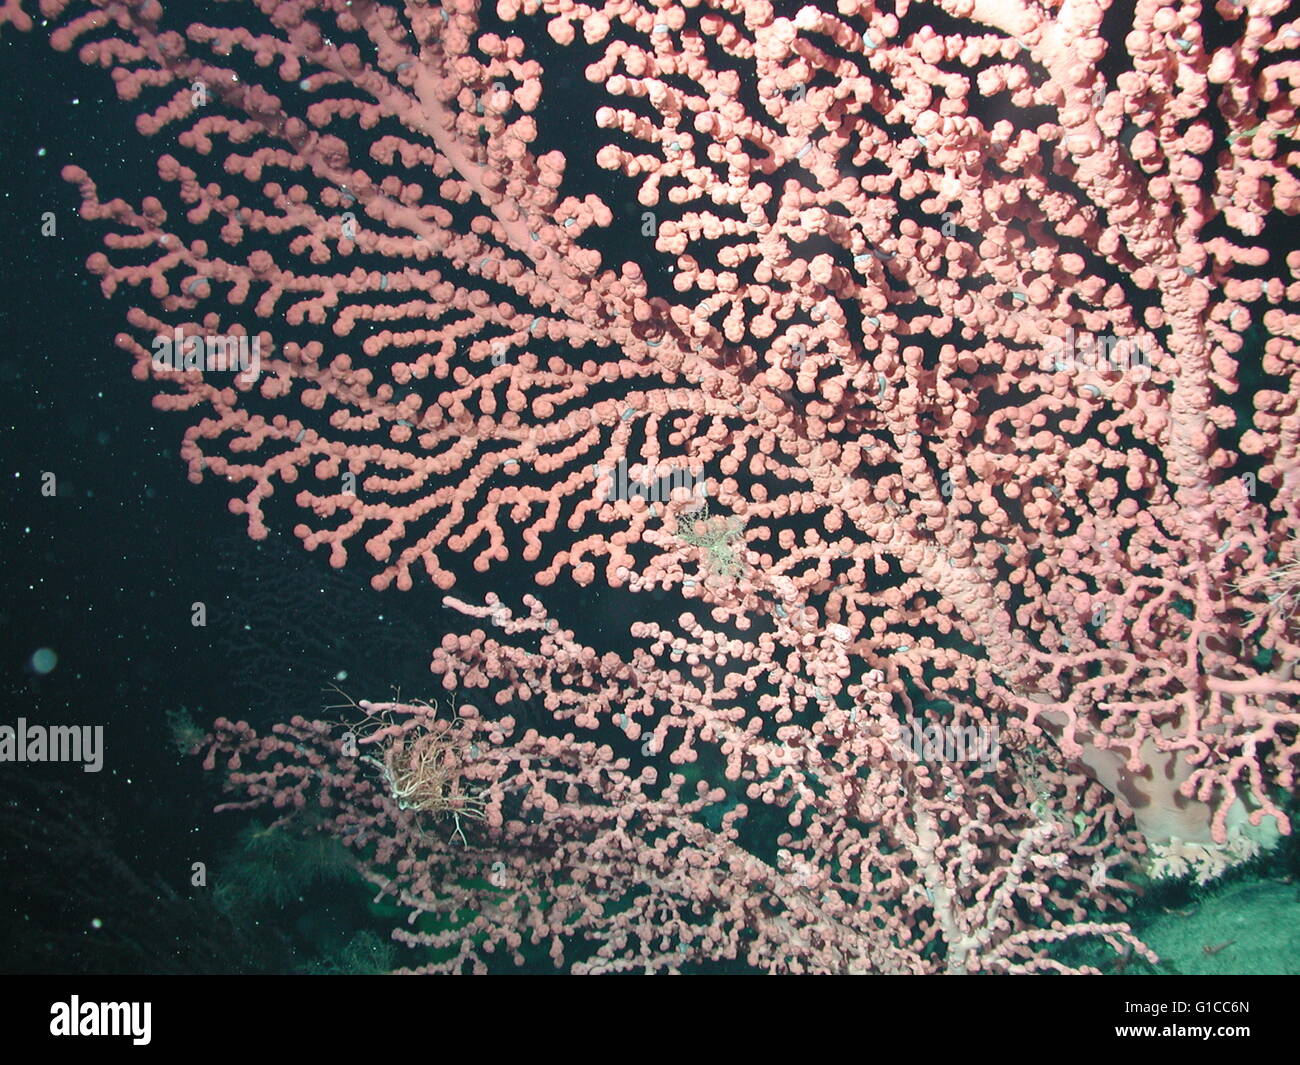 Bubble gum coral (Paragorgia arborea) and small blue scale worms (Family Polynoidae) which were often associated with this type of coral. Stock Photo